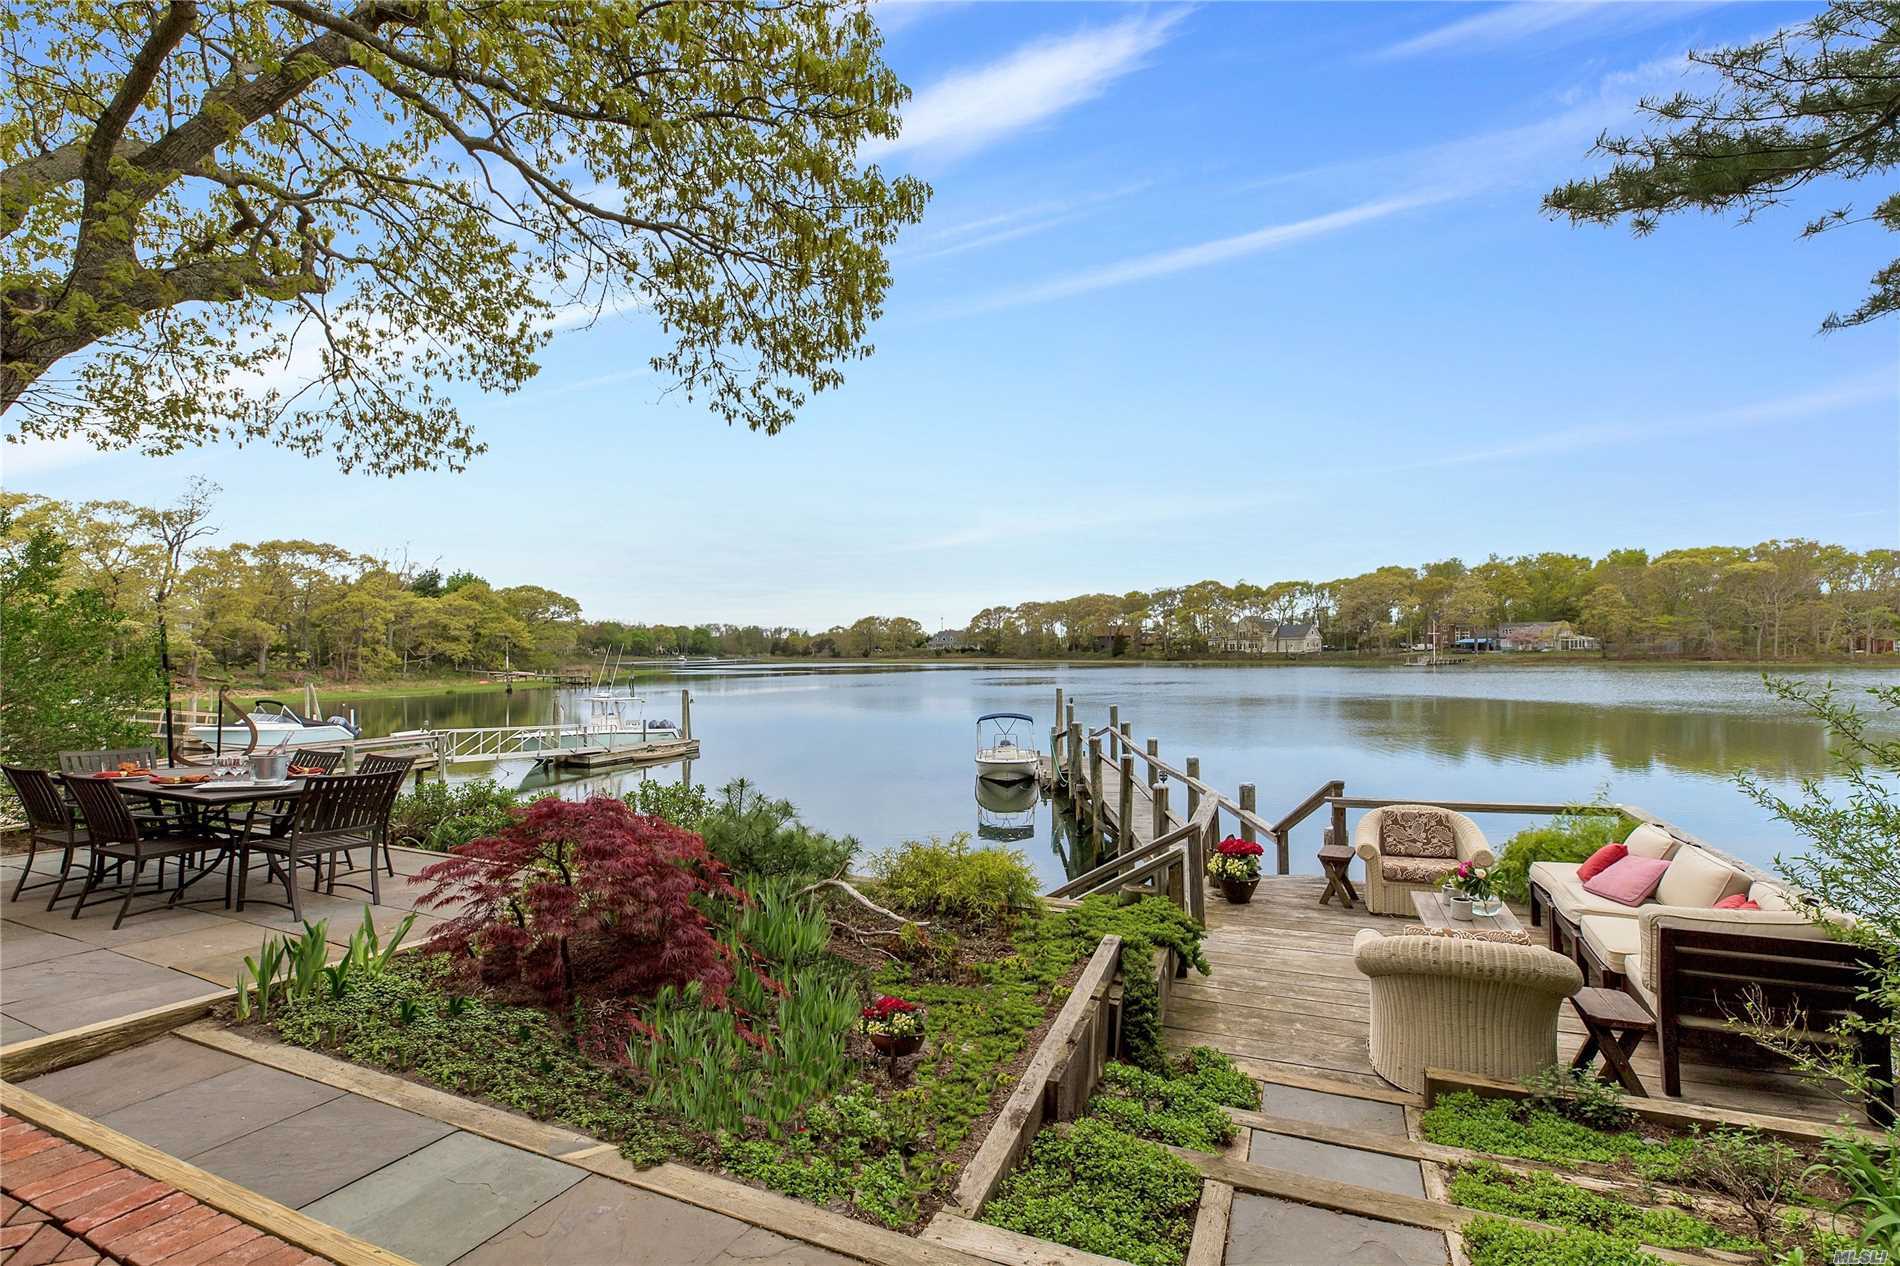 New To The Market - Premier Showing. It Doesn&rsquo;t Get Any Better! Waterfront, Dock, Wide Open Views, Beautiful Designer Gardens, 3/4 Bedrooms, 2 Baths, Great Room, Cottage /Garage. Private And Extra Special!